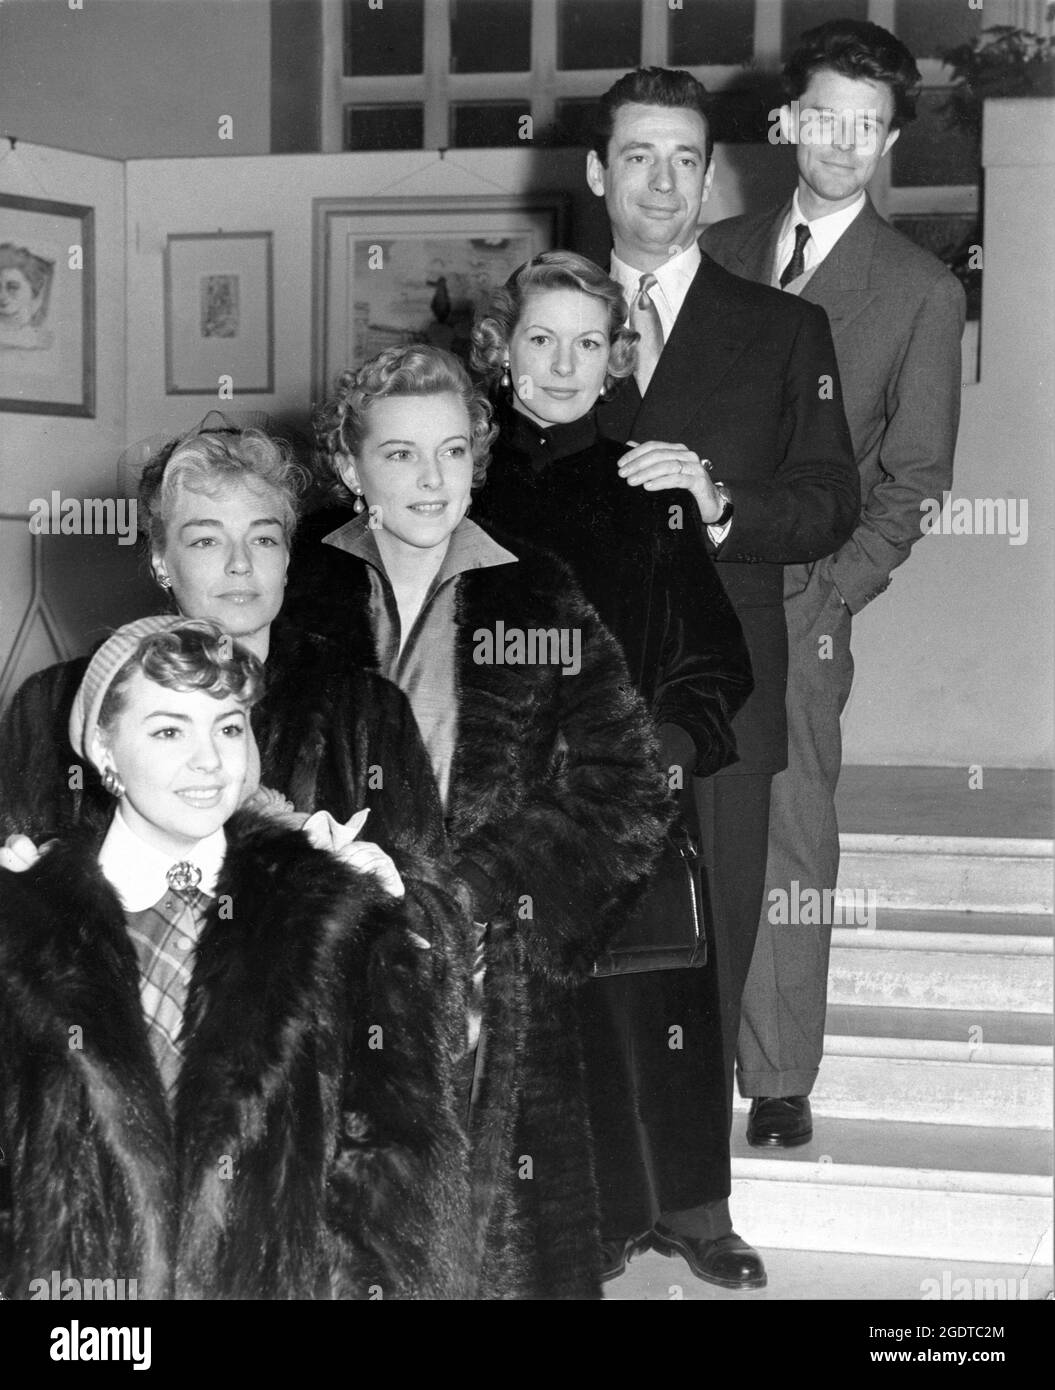 GERARD PHILIPE YVES MONTAND MADELEINE ROBINSON DANIELLE GODET SIMONE SIGNORET and MAGALI VENDEUIL pose together at a Reception at the French Institute South Kensington for a French Film Festival in London in February 1953 Stock Photo